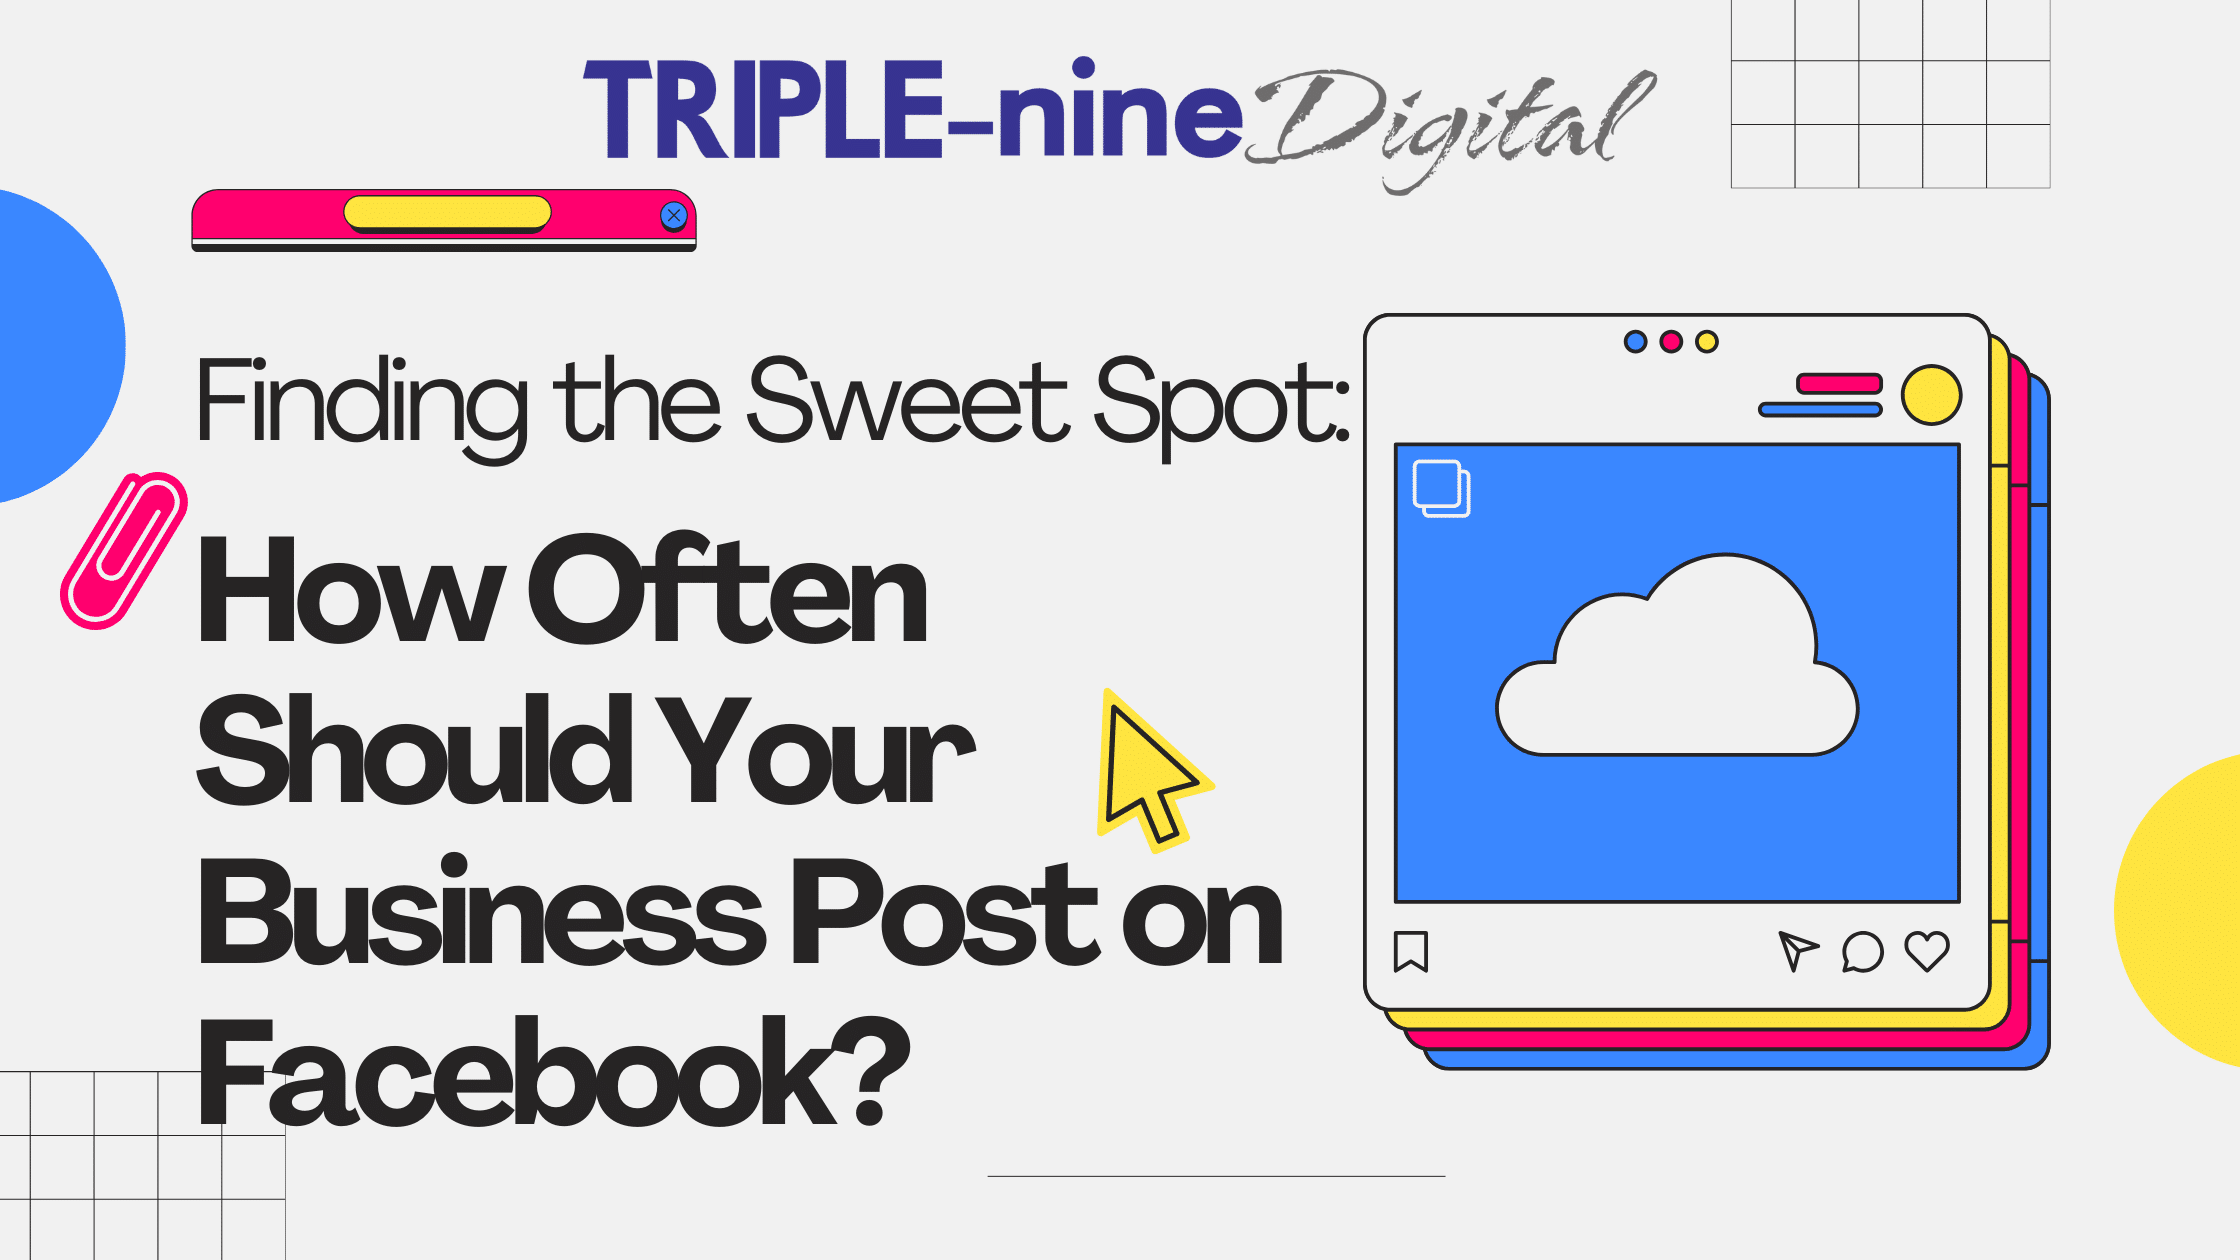 Finding-the-Sweet-Spot-How-Often-Should-Your-Business-Post-on-Facebook-Triple-Nine-Digital-Marketing-Agency.png